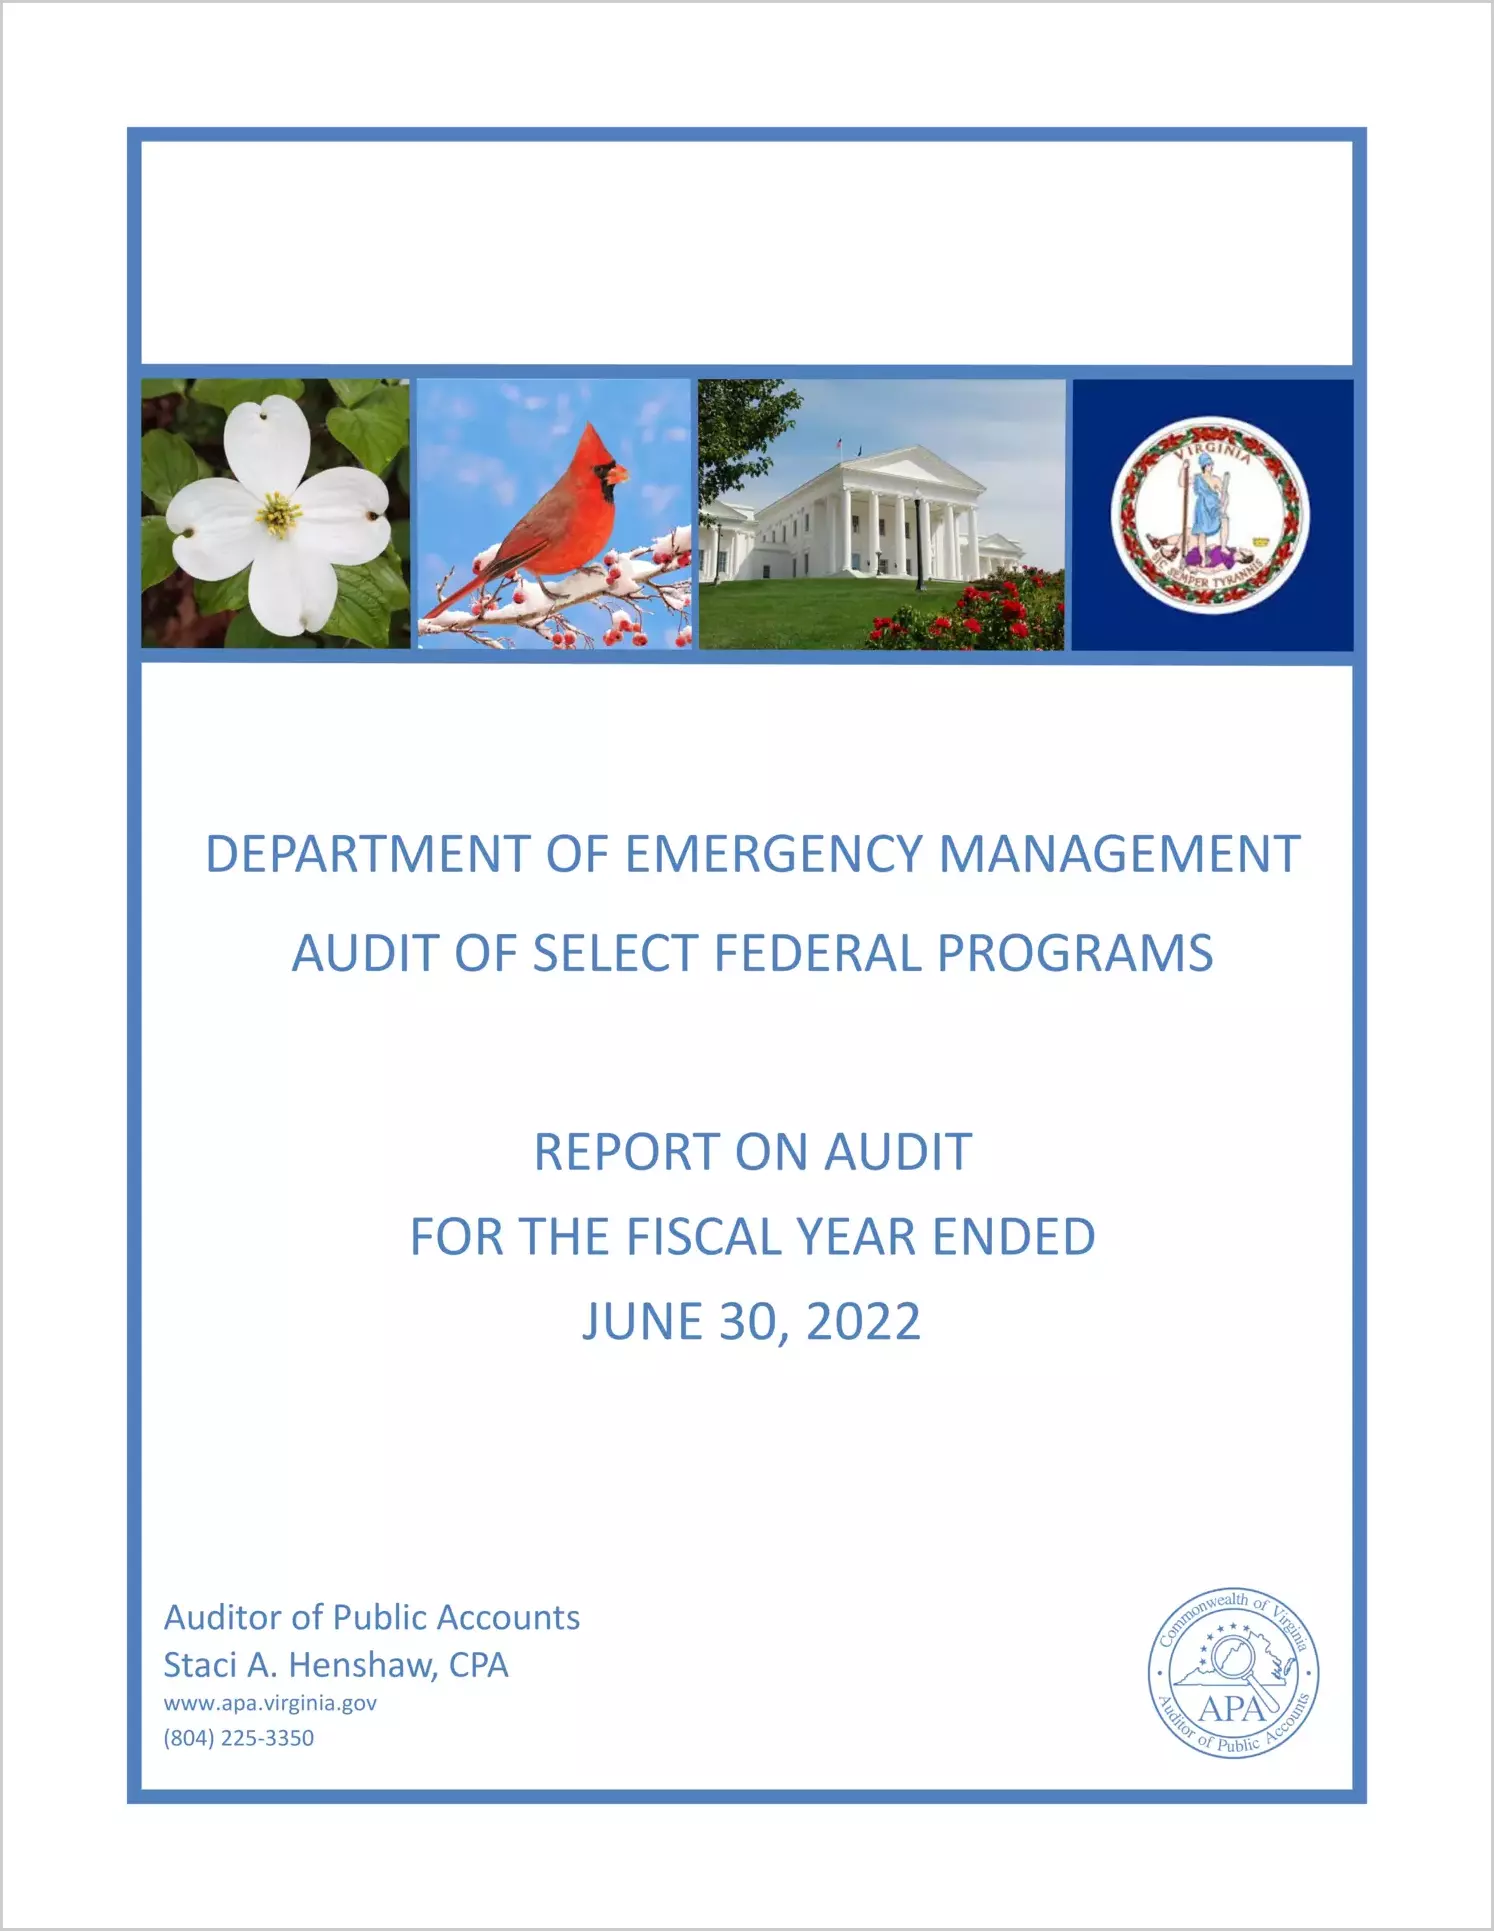 Department of Emergency Management Audit of Select Federal Programs for the fiscal year ended June 30, 2022